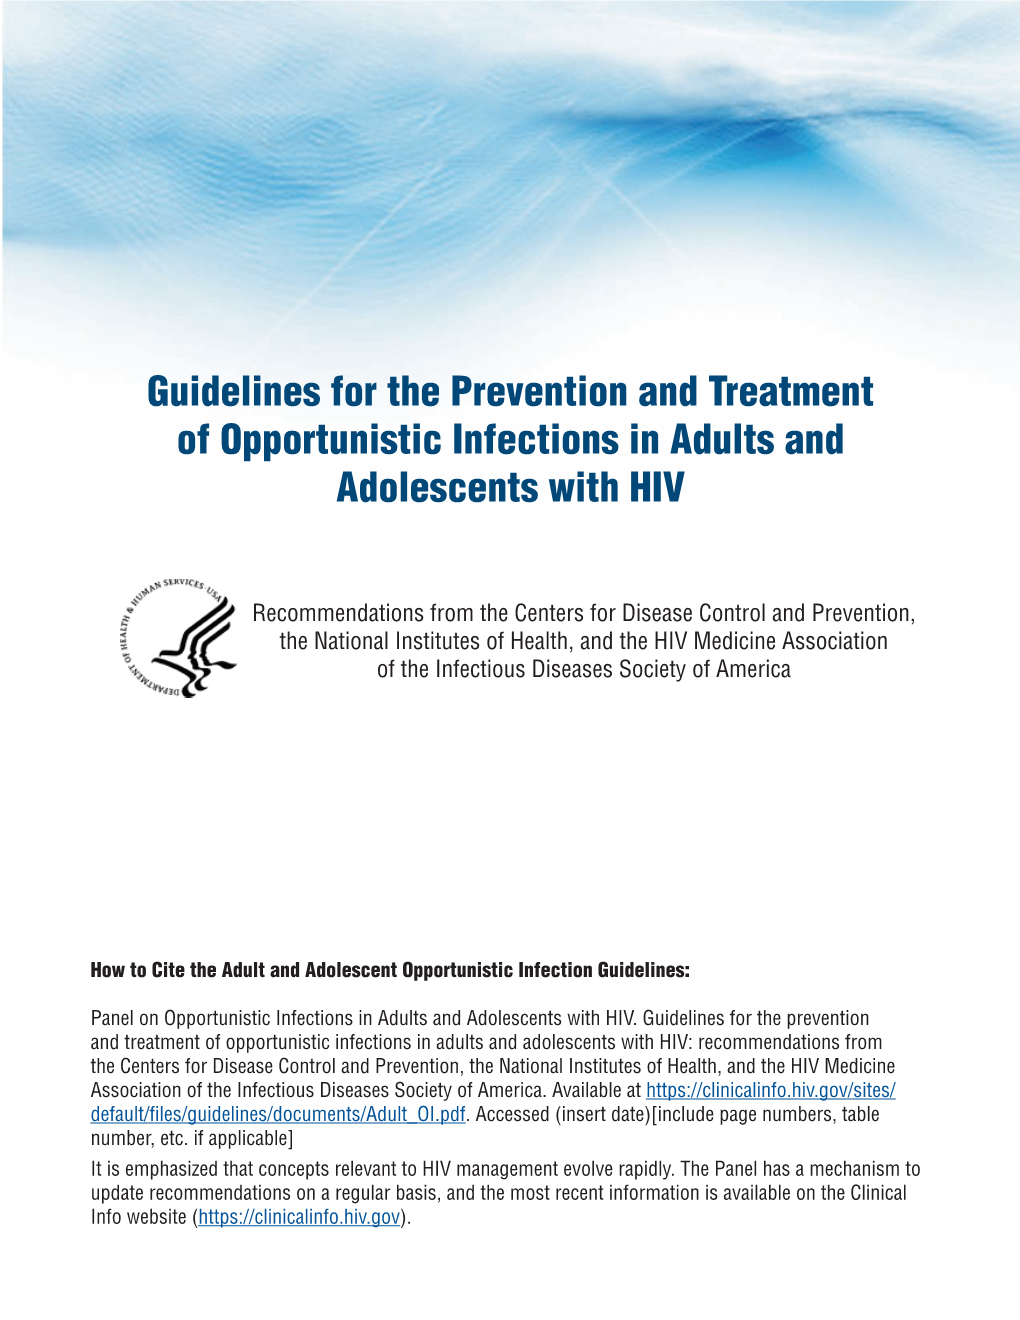 Guidelines for the Prevention and Treatment of Opportunistic Infections in Adults and Adolescents with HIV